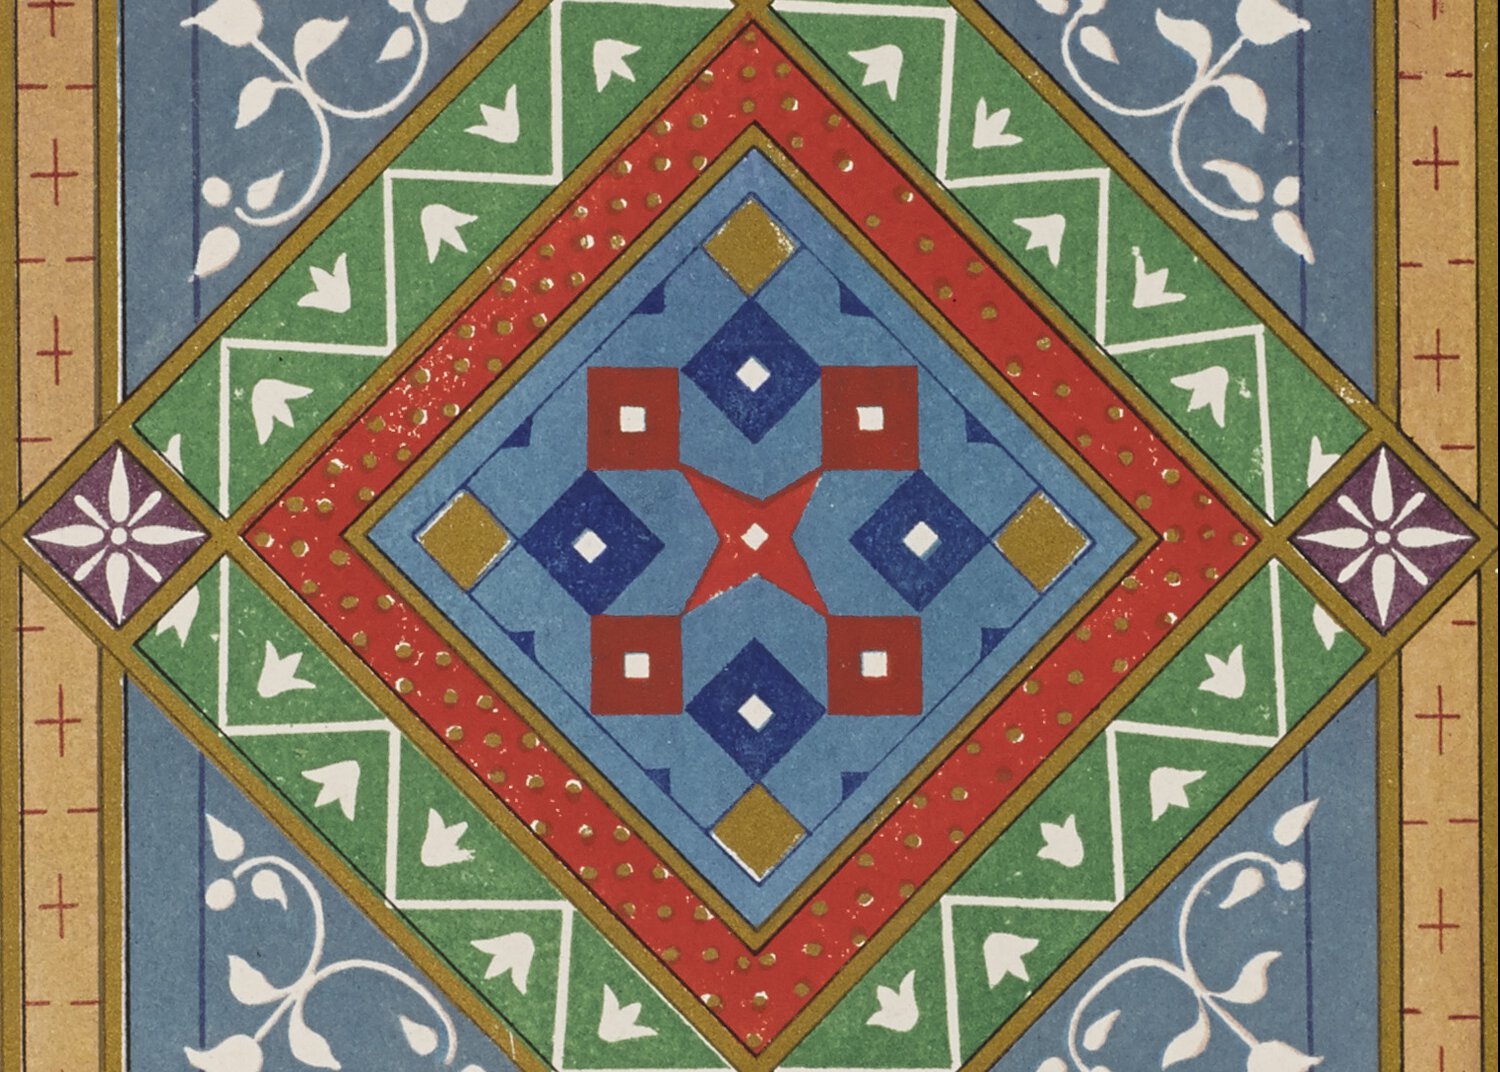 Intricate, multi-layer, square pattern with beige, blue, purple, green, and red elements.